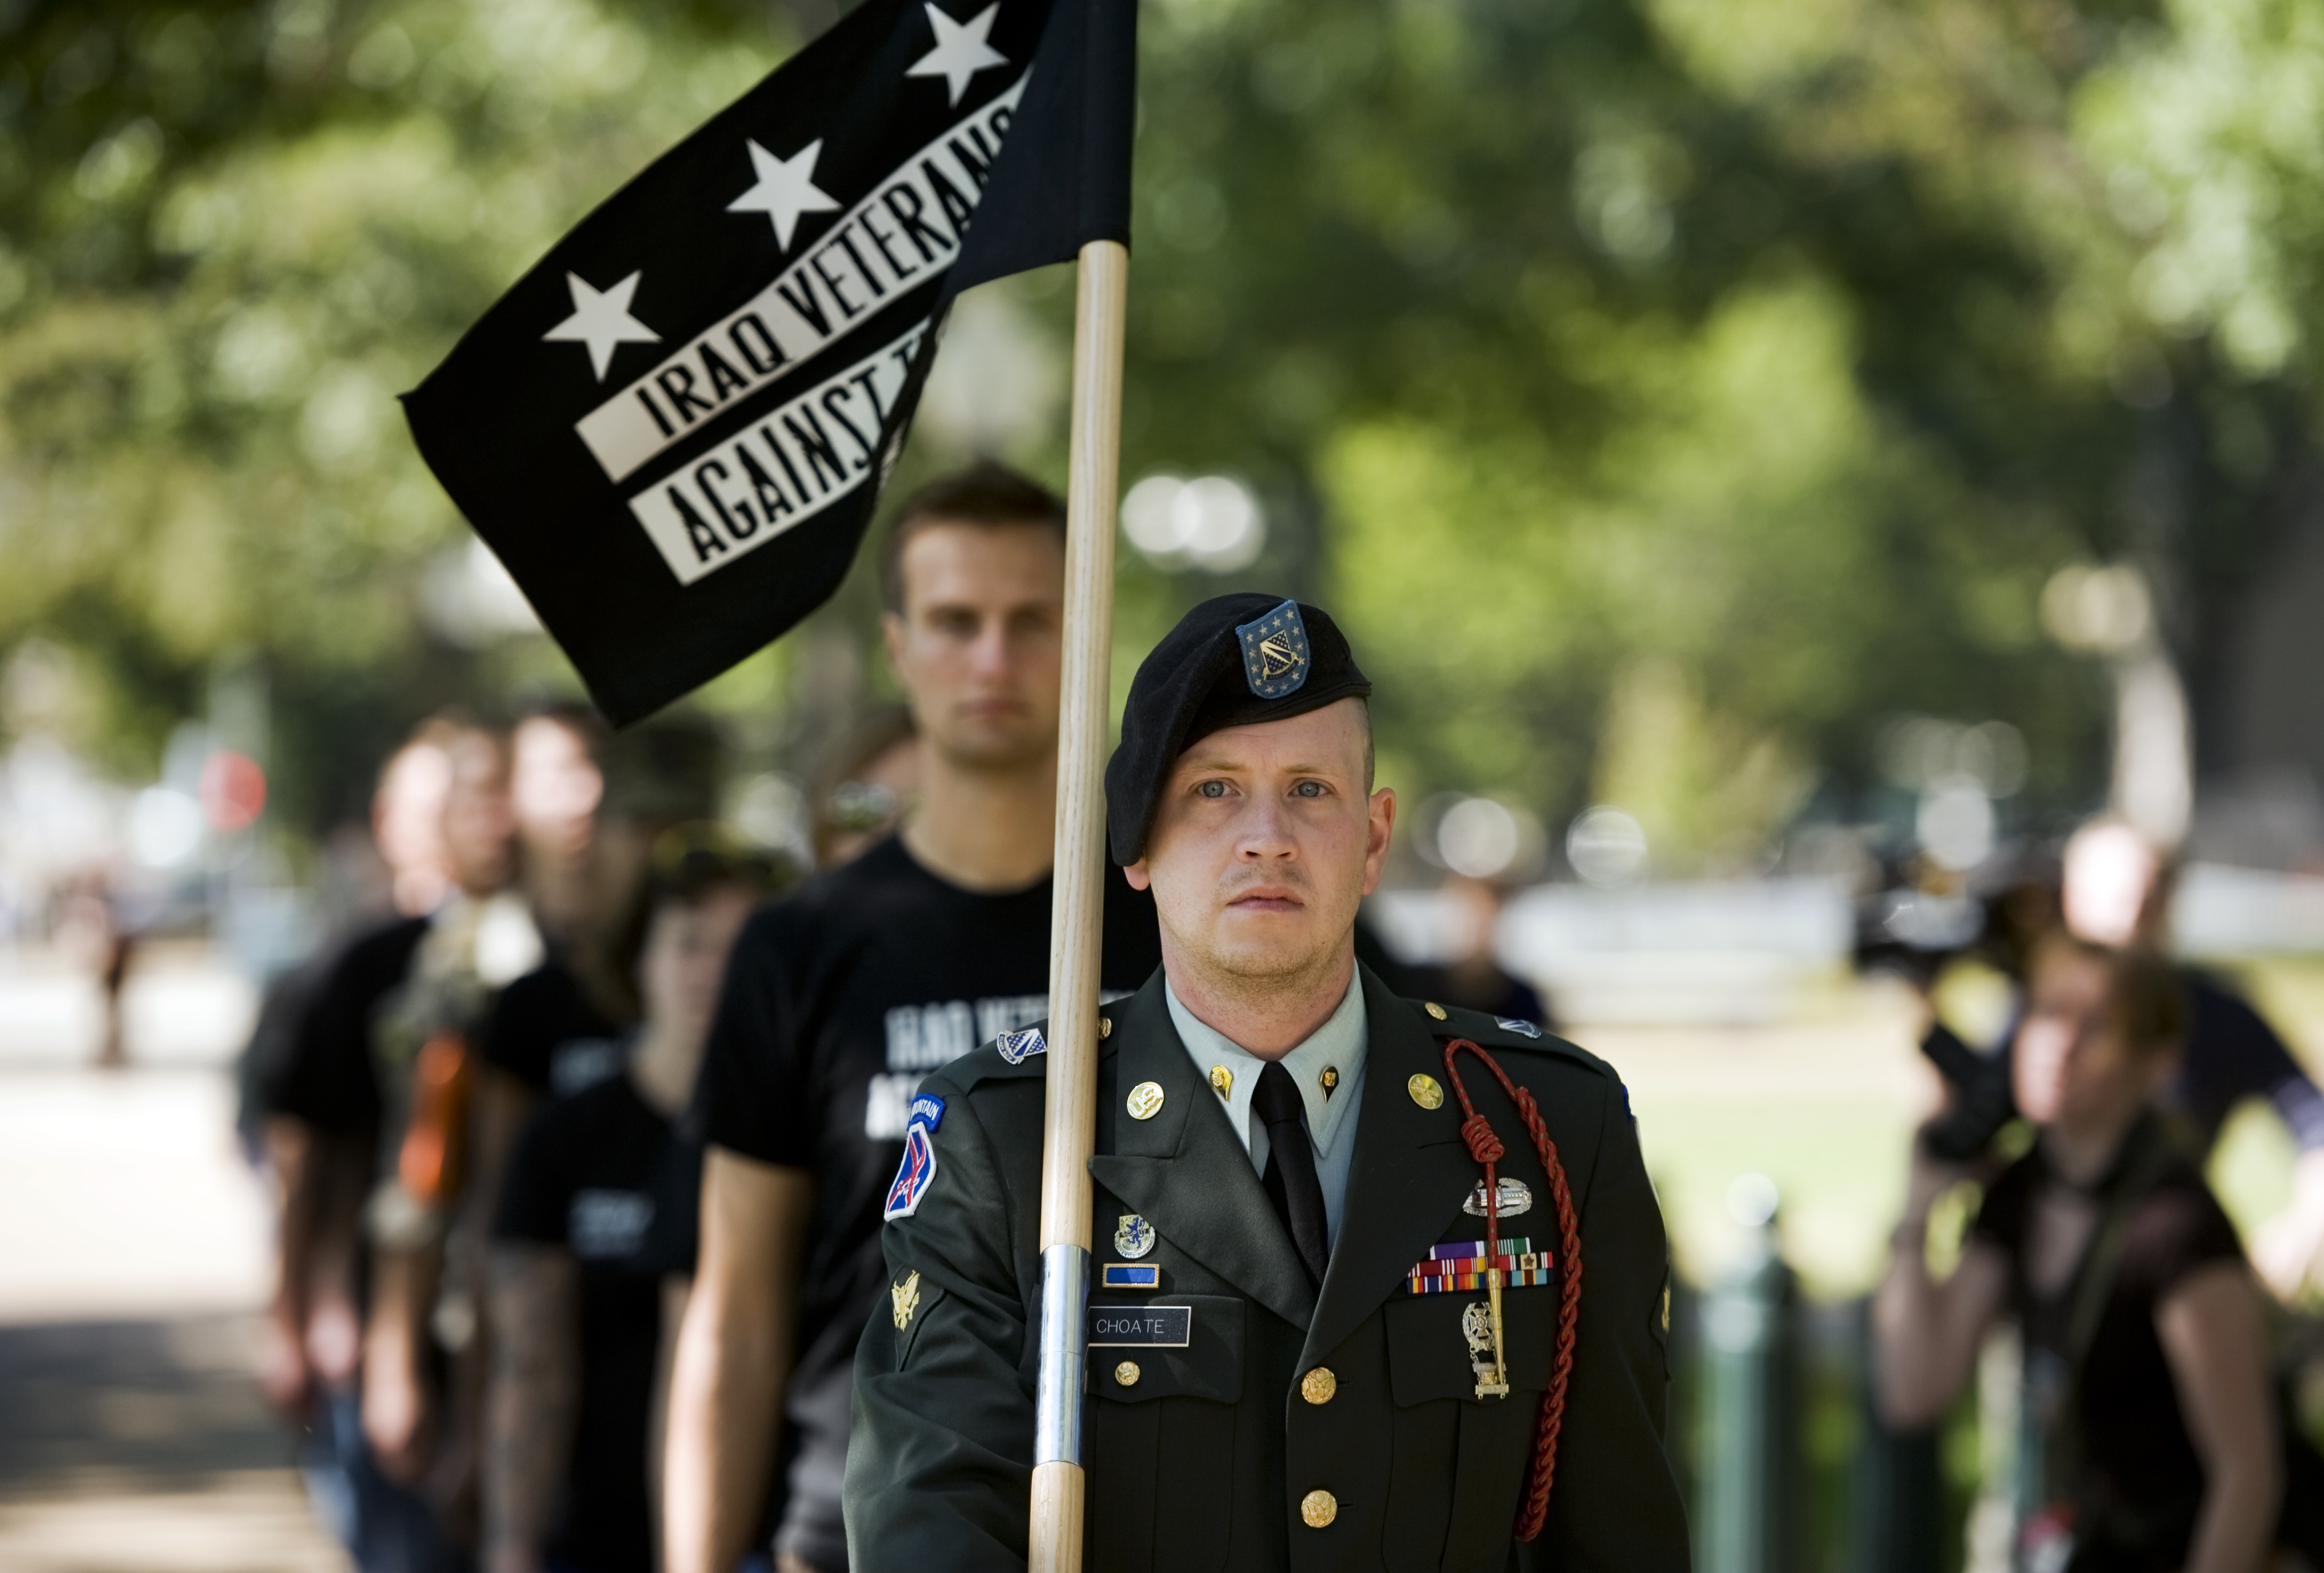 Iraq war veteran Zach Choate, 26, leads a group of veterans to a rally on the steps of Russell Building to call for a end to the redeployment of troops who have diagnosed with Post Traumatic Stress Disorder (PTSD).  Choate was redeployed while still recovering from wounds inflicted by an IED. (Tom Williams&mdash;CQ-Roll Call,Inc.)